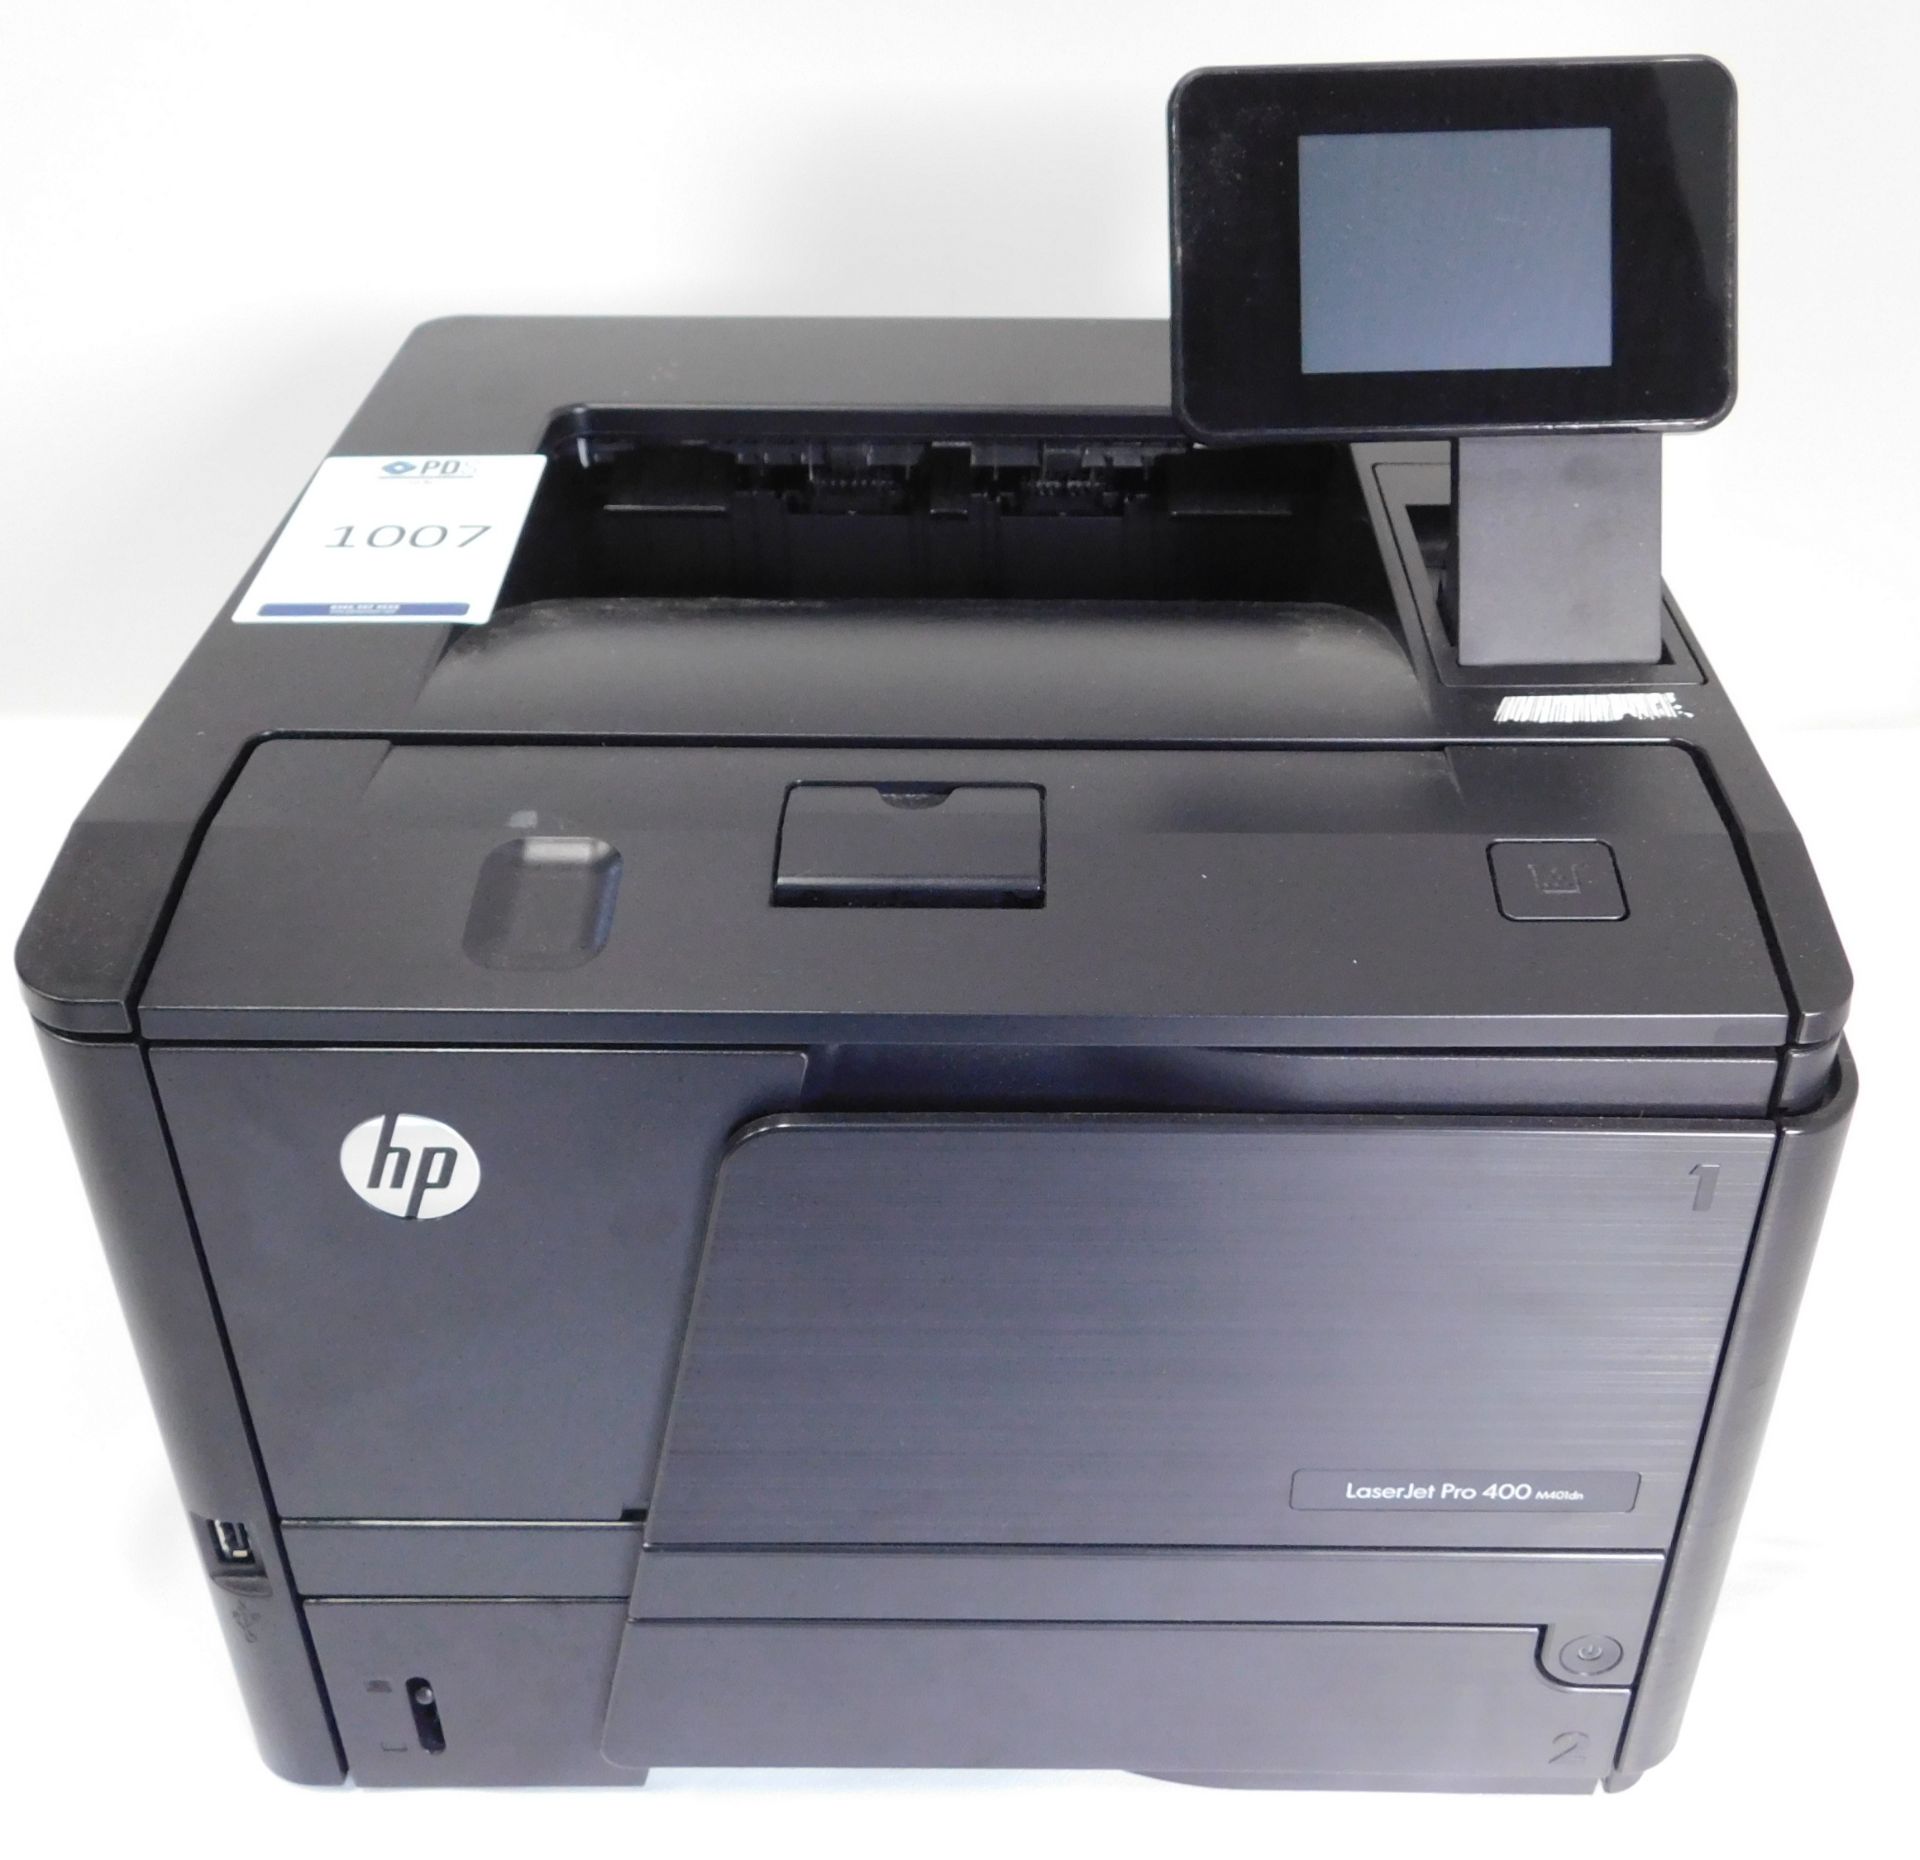 2 HP Pro 400M401dn printers (Located Brentwood - See General Notes for More Details)